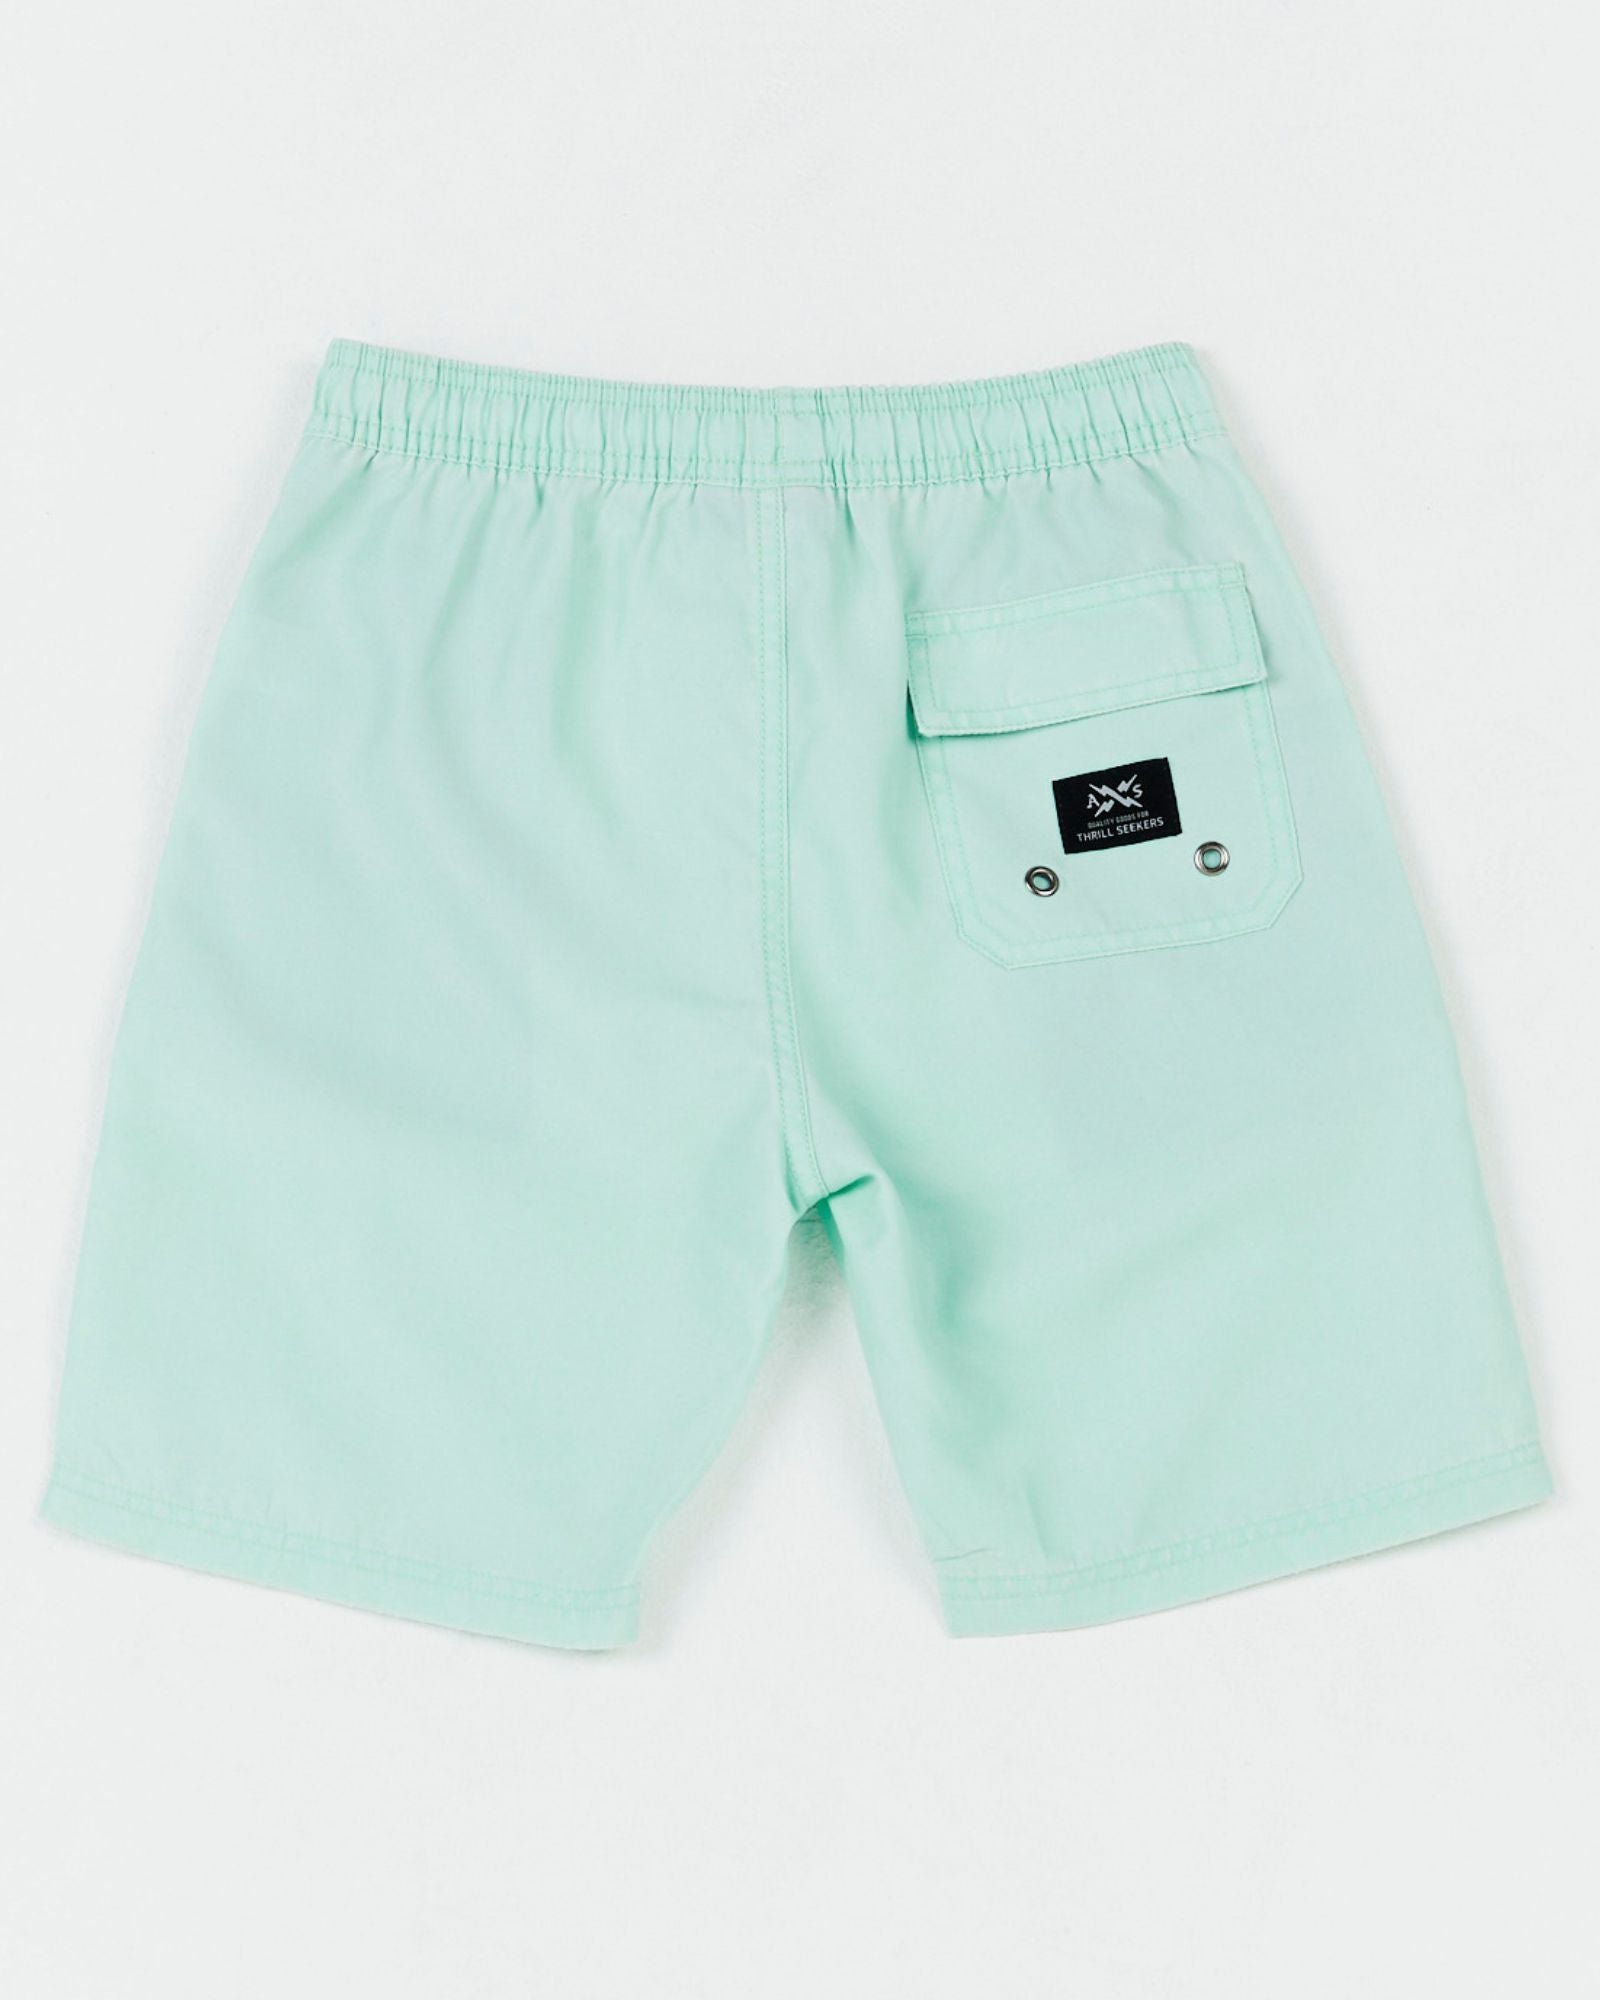 Alphabet Soup's Kids Go To Beach Shorts in mint green for boys aged 2-7. Featuring elasticated waist, adjustable drawcord, 2 mesh-lined pockets & back pocket, velcro-fastening, quick-drying & non-stretch fabric.